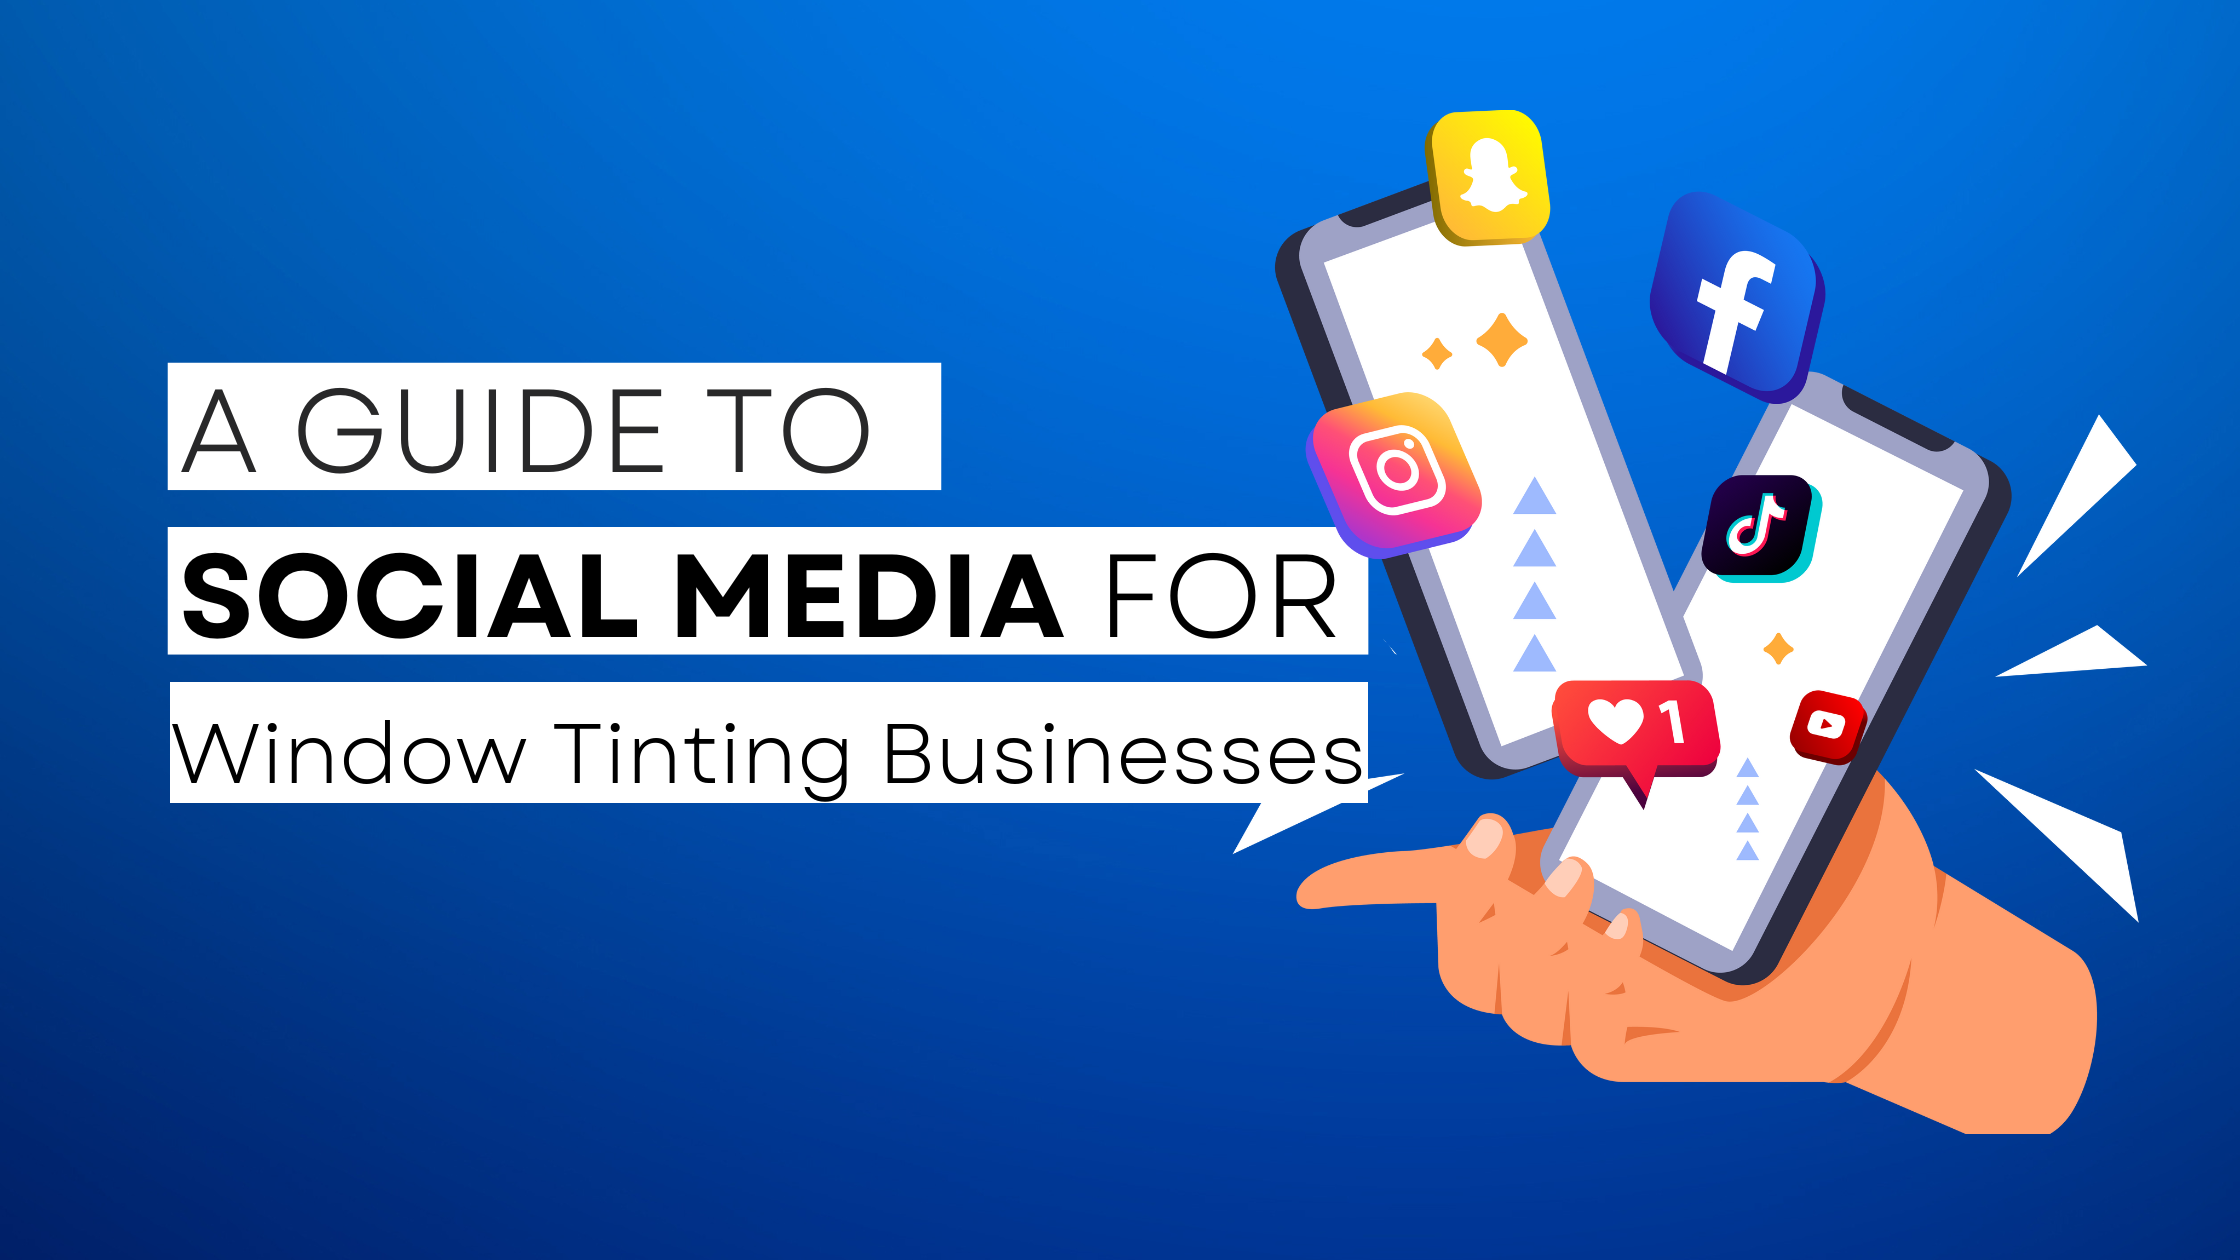 How to start Window Tinting  on social media